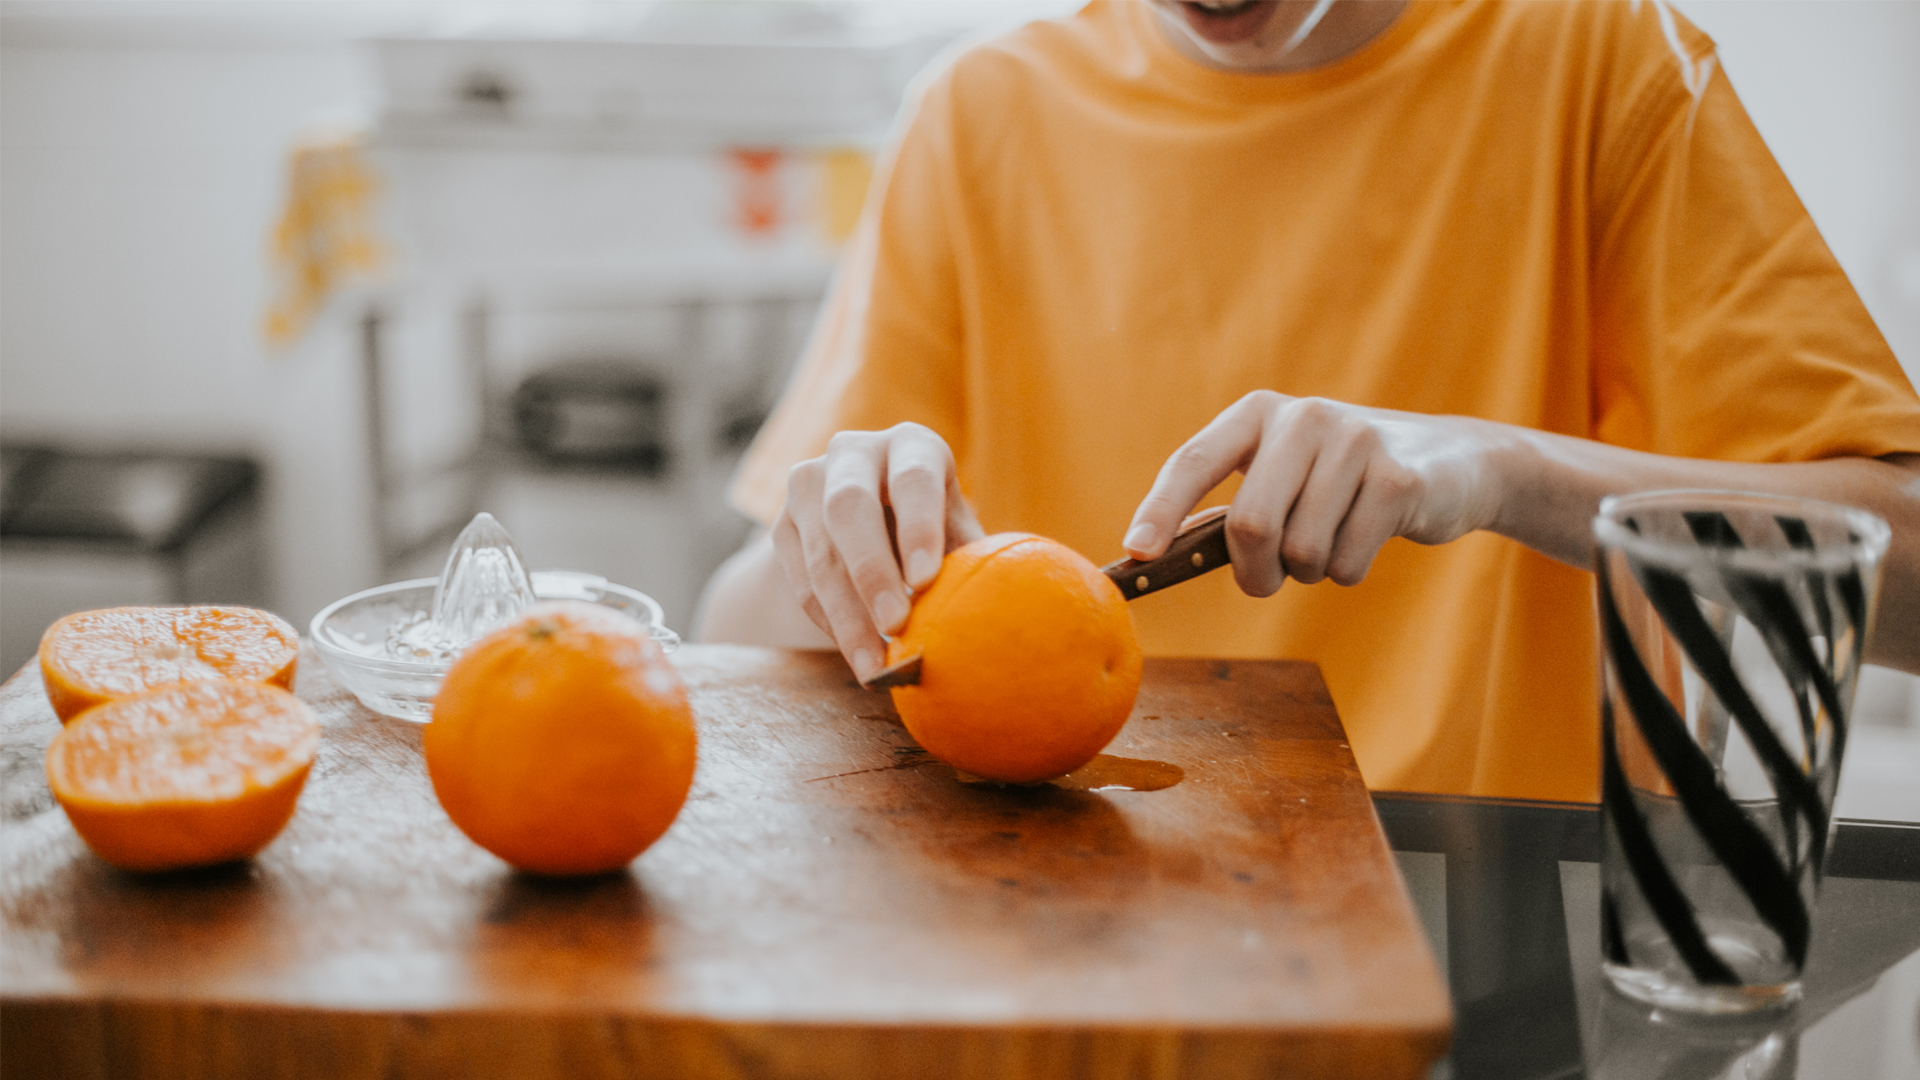 Image of a woman slicing oranges